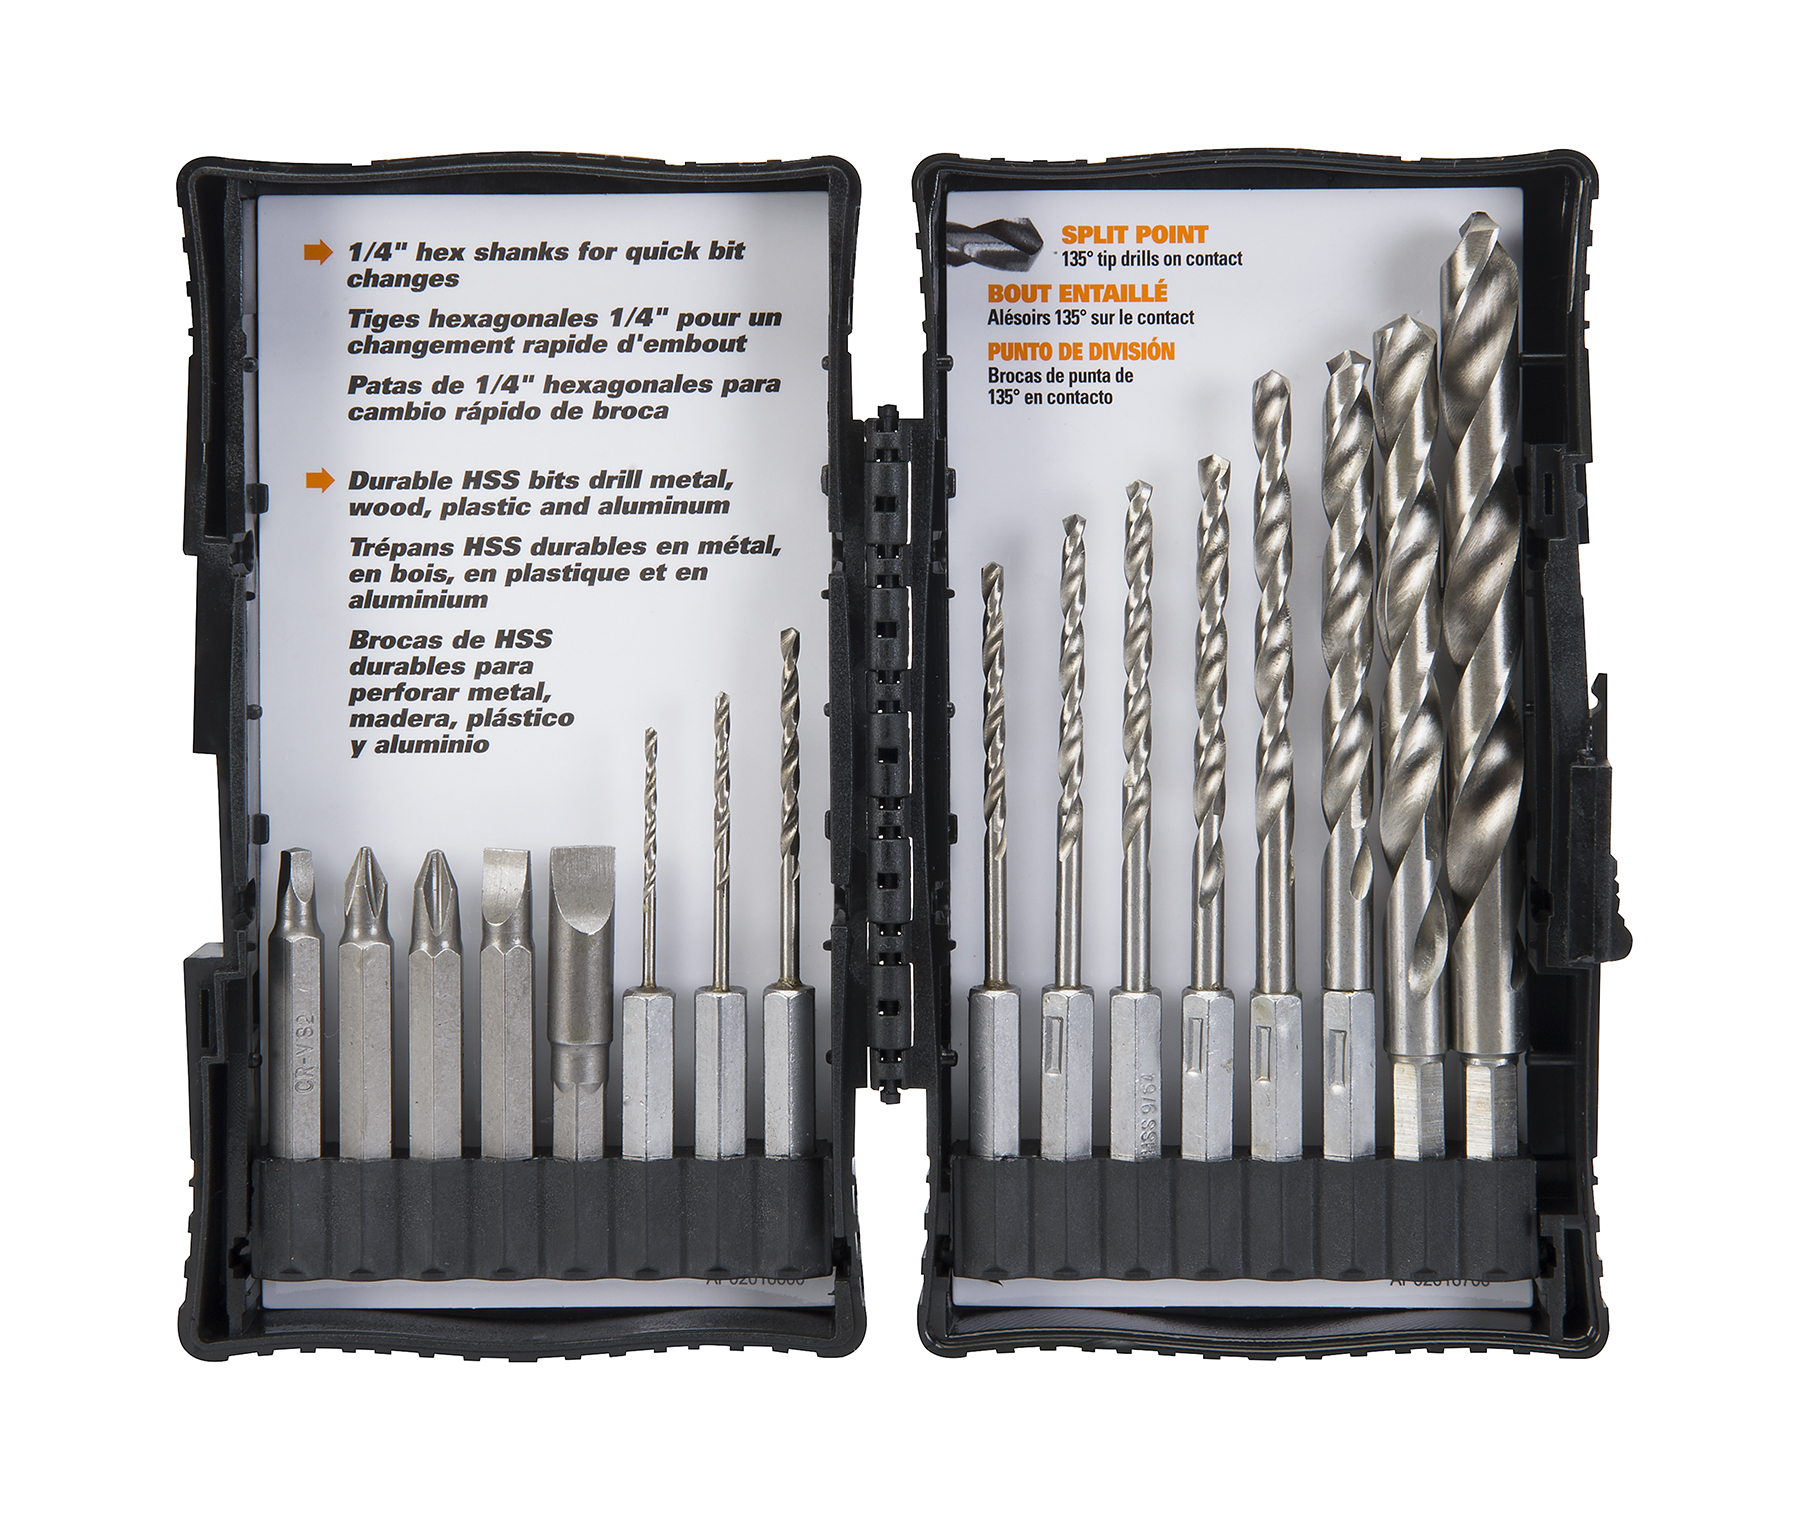 WORX 16-Piece Drill & Drive Bit Set features 1/4 in. hex shanks for use in quick-change chucks.